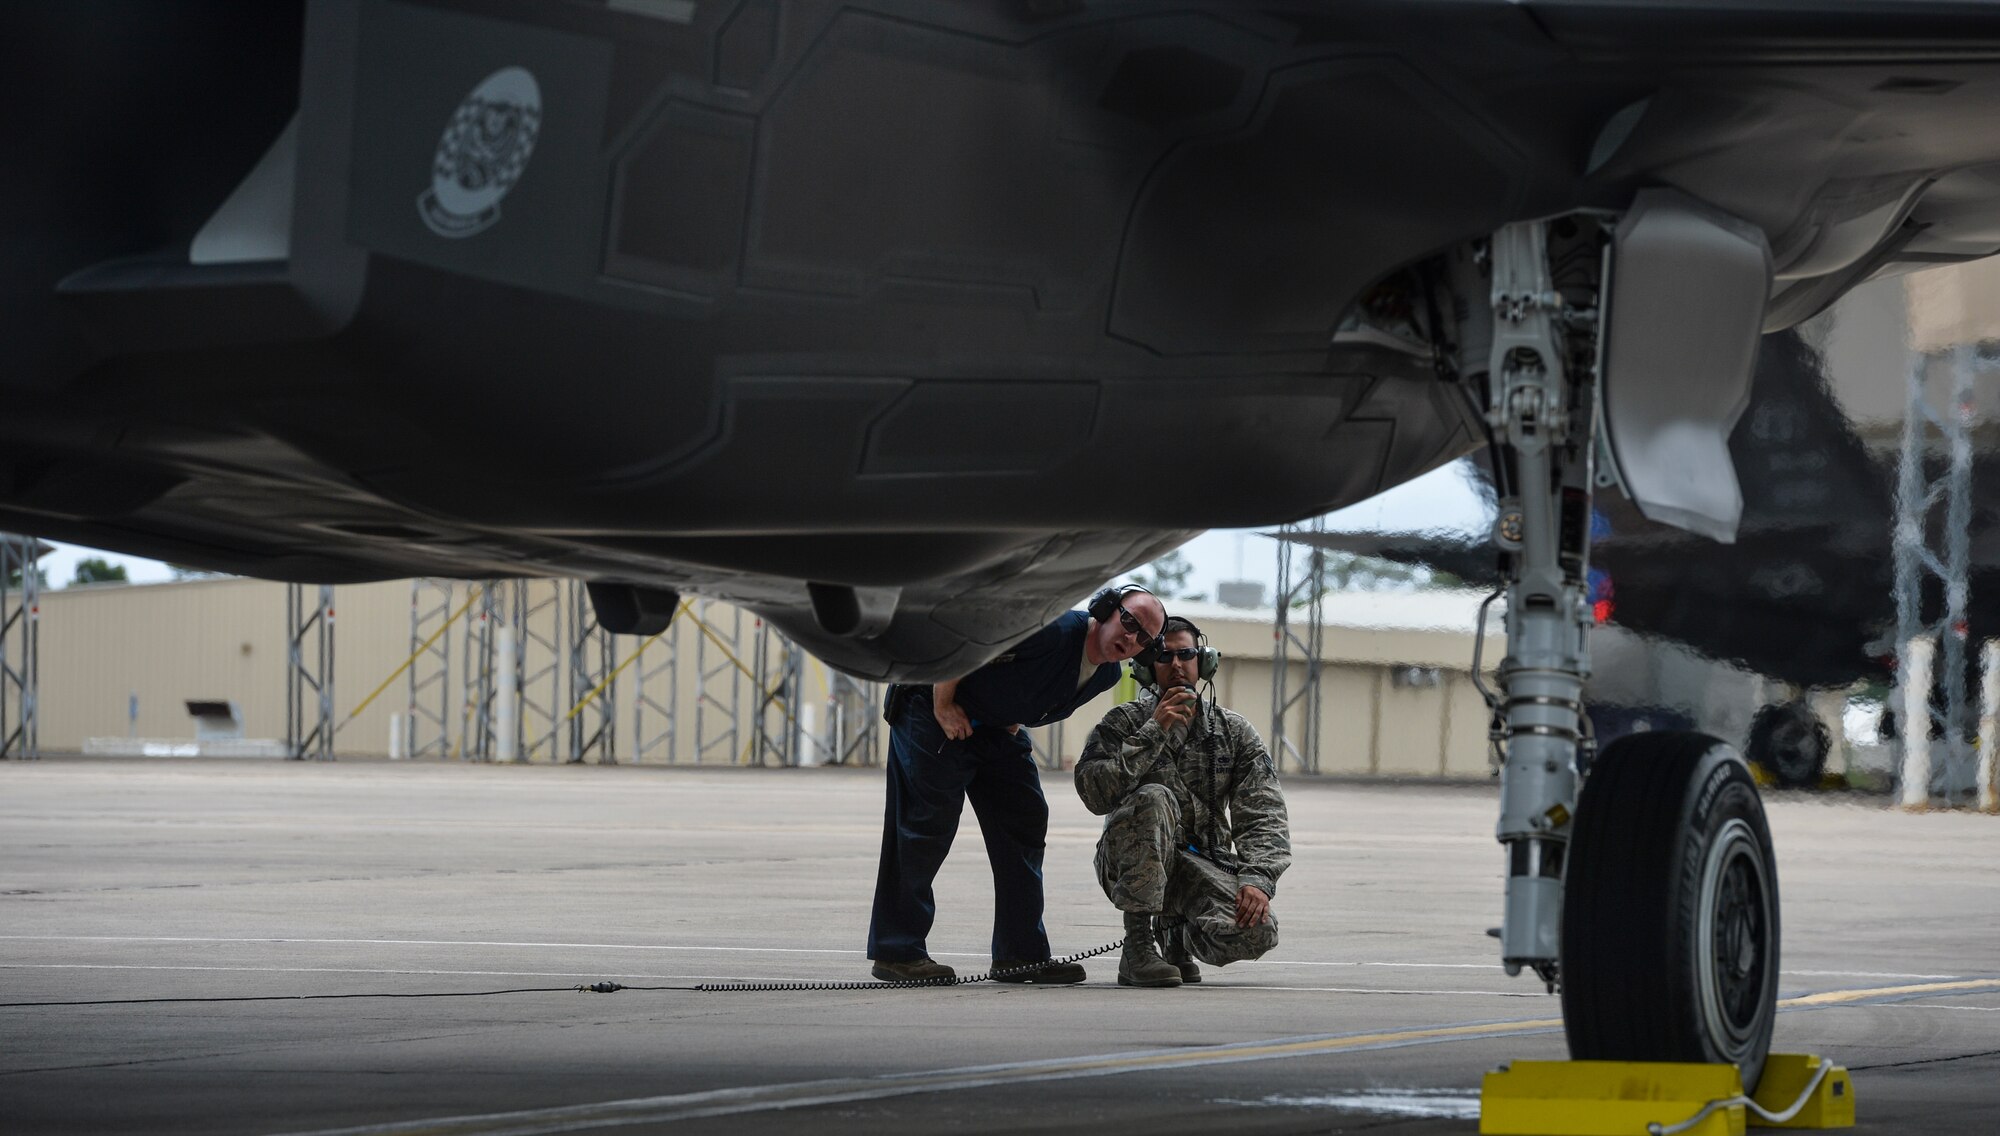 Airmen from the 58th Aircraft Maintenance Unit look over the 26th and final F-35A Lightning II assigned to the 33rd Fighter Wing on Eglin Air Force Base, Fla., May 28, 2014. The arrival of the final F-35A marks a shift in priorities for the 58th Fighter Squadron and 58th AMU, since the first F-35A was delivered in July 2011. (U.S. Air Force photo/Senior Airman Christopher Callaway)




